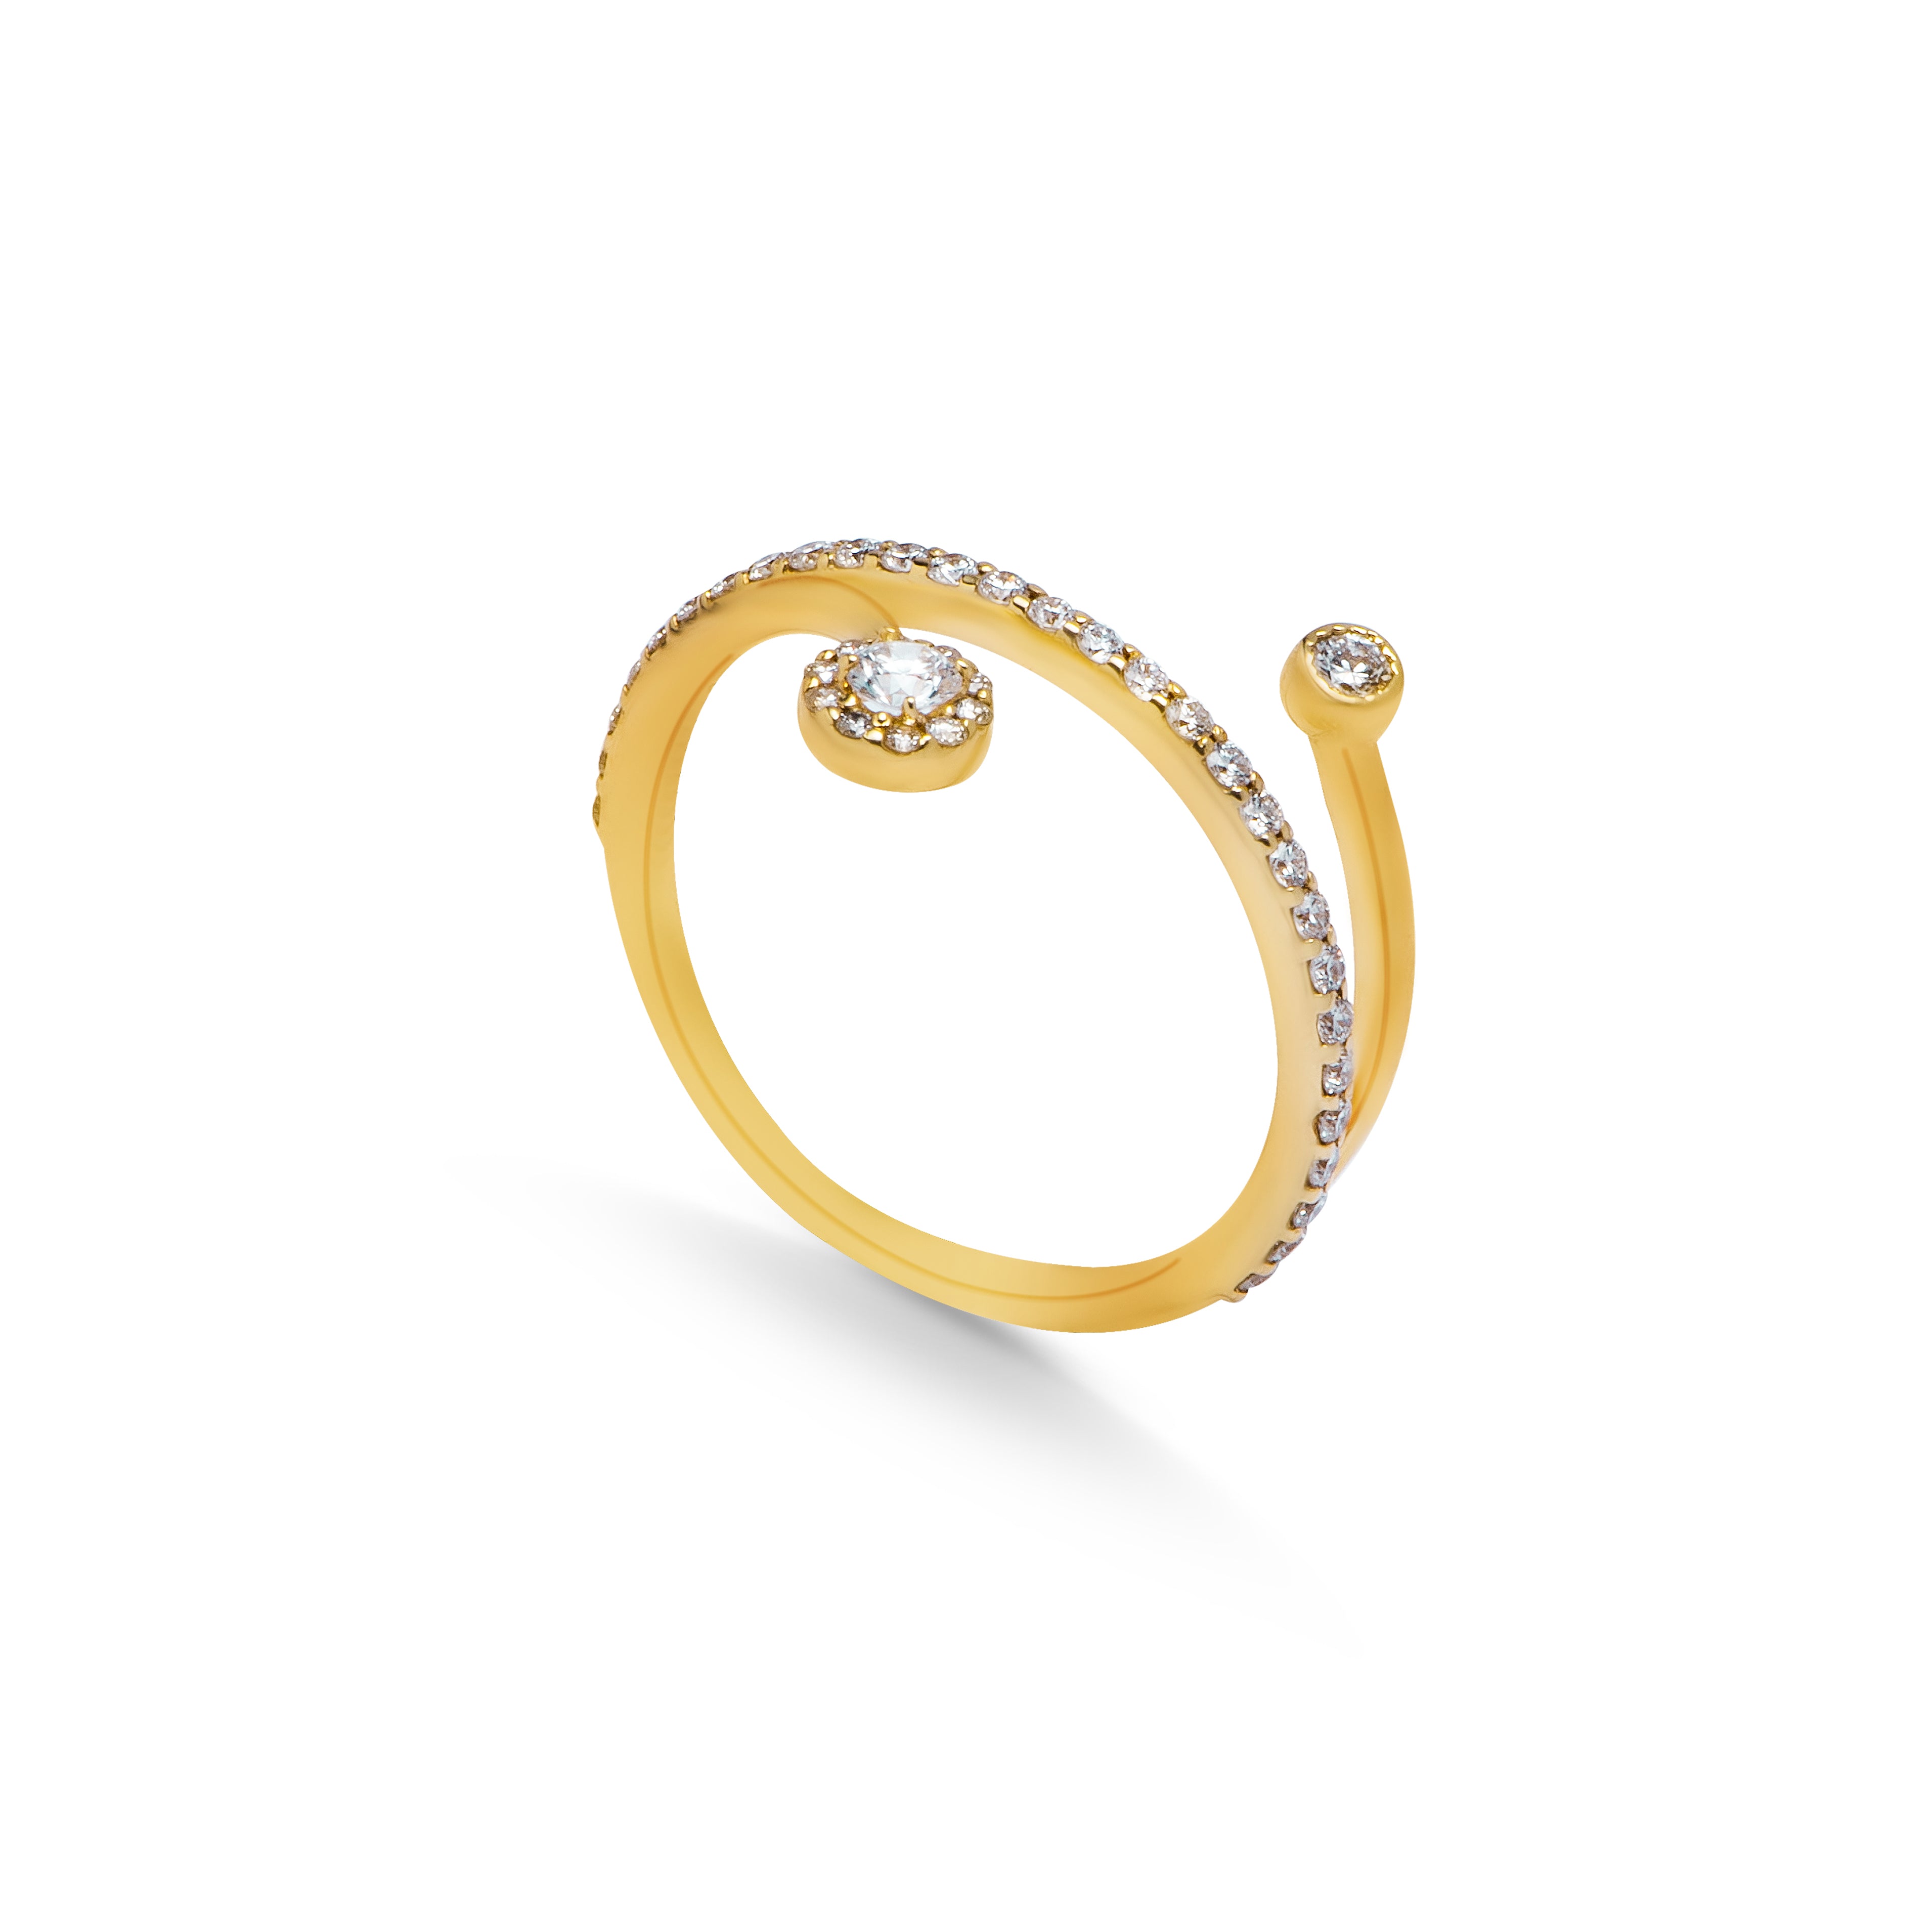 2 Beams Floral Diamond Ring in Yellow 18K Gold - SIR1508R